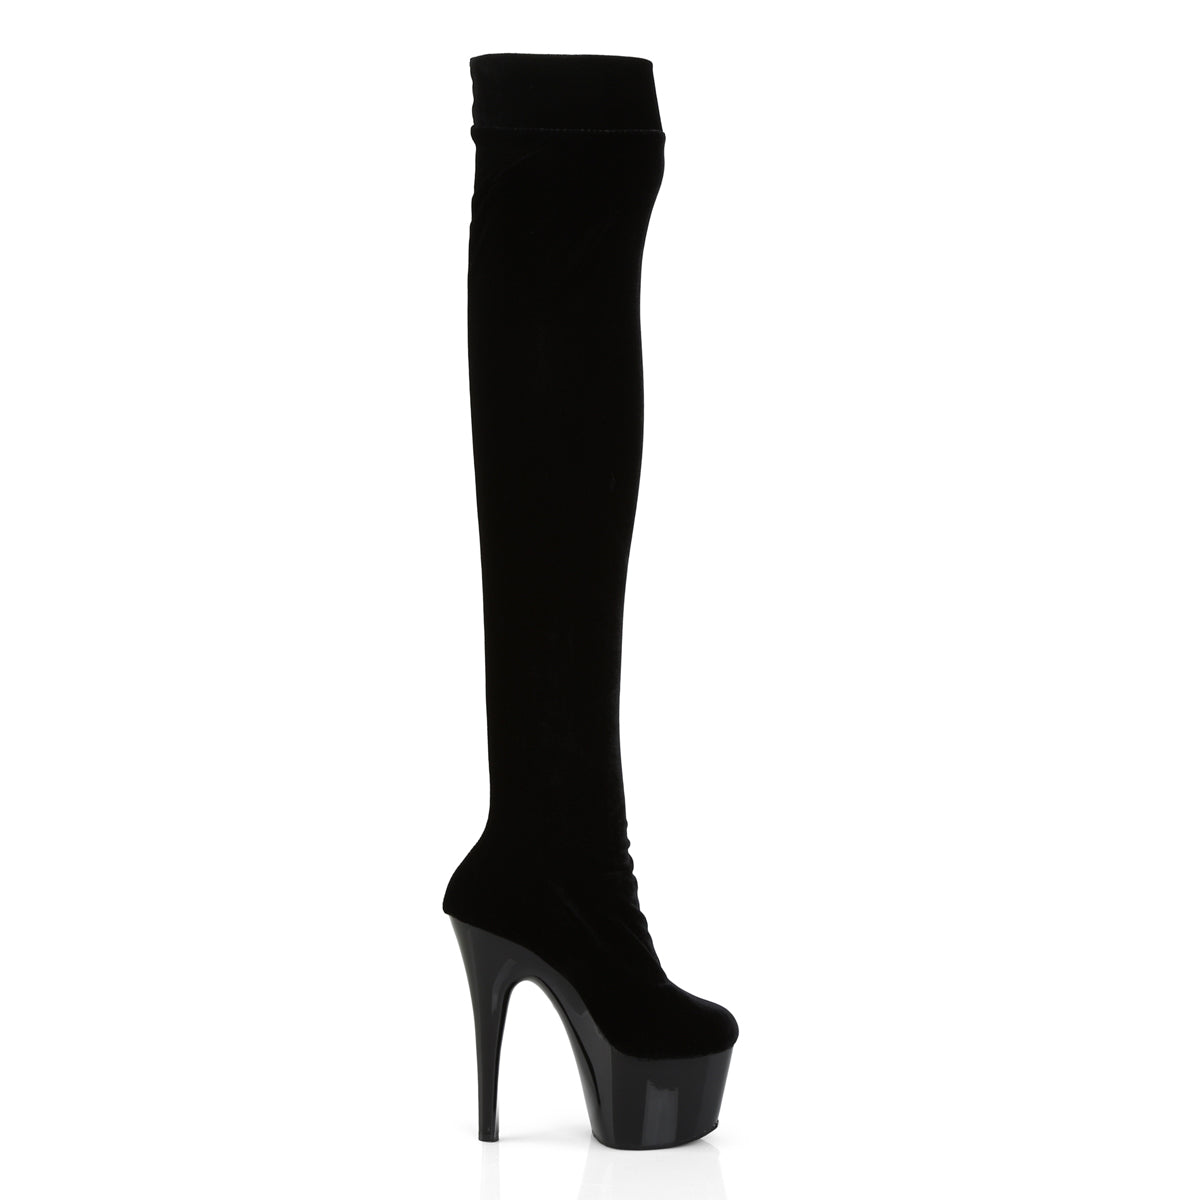 ADORE-3002 7" Heel Black Stretch Velvet Pole Thigh High Boot-Pleaser- Sexy Shoes Fetish Heels